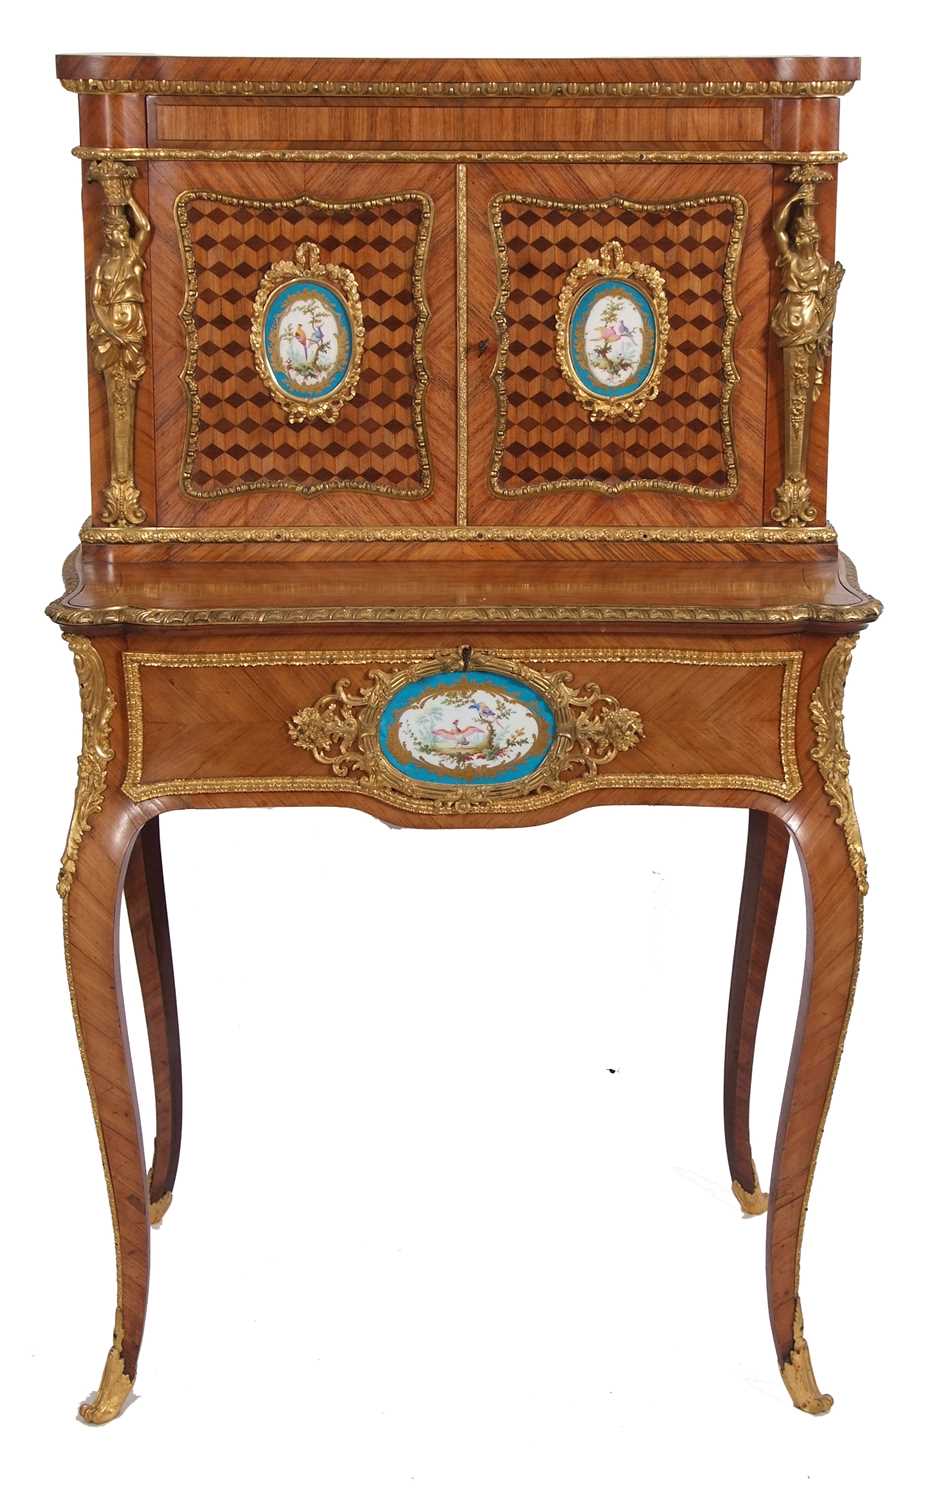 A French walnut porcelain and ormolu desk with two panelled doors to the top over a base with single - Image 11 of 16